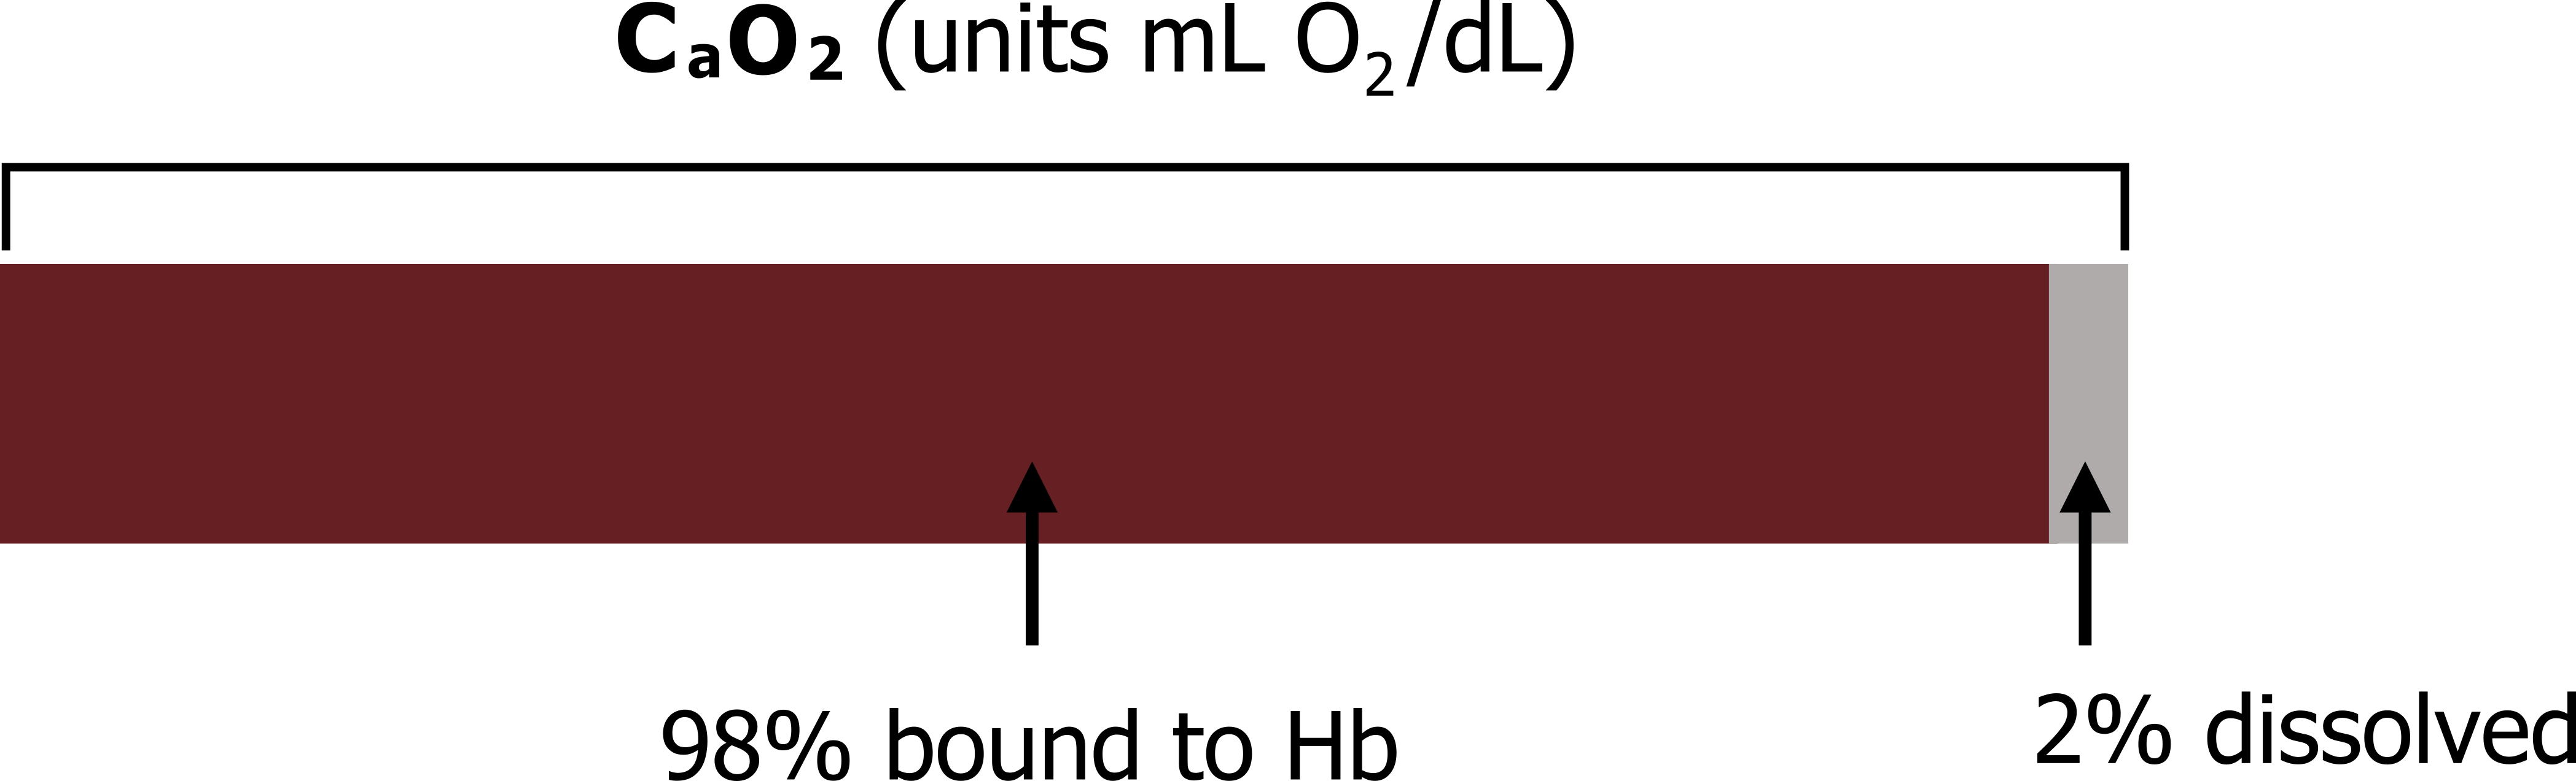 A rectangle labeled CaO2 (units mL O2/dL) divided into two sections; 98% bound to Hb and 2% dissolved.